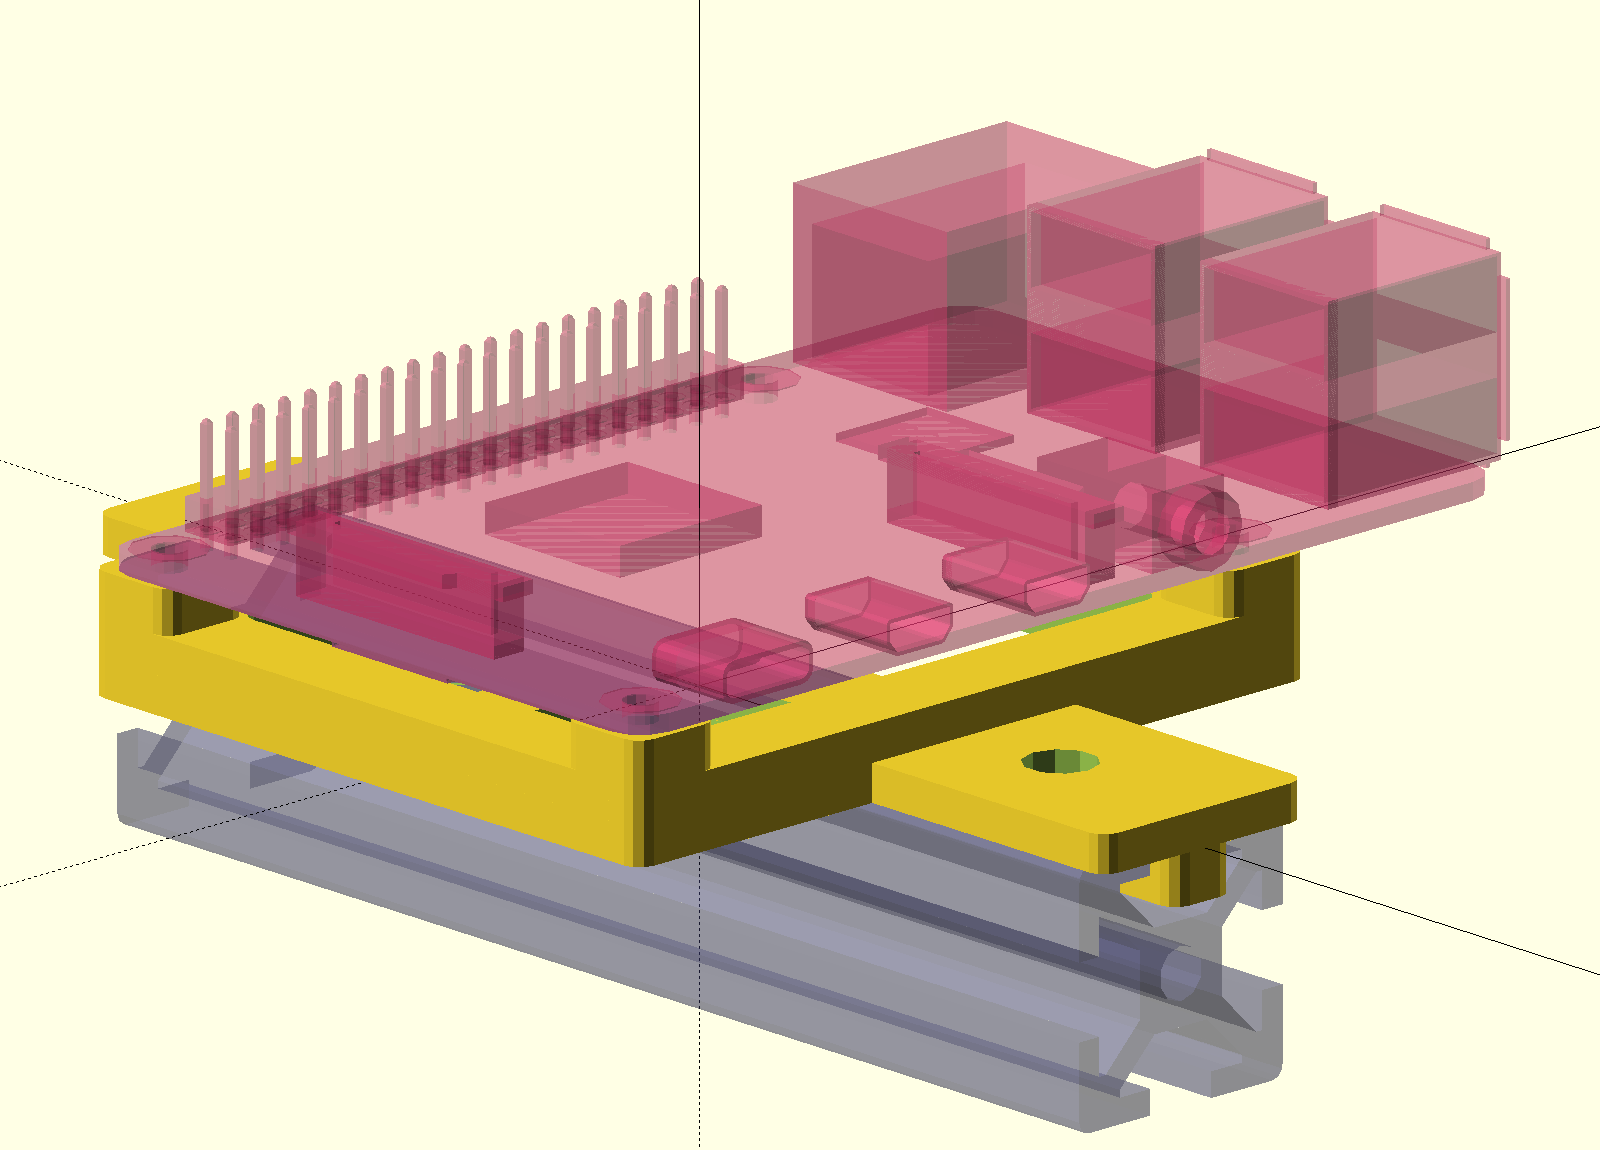 CAD render of the bracket with t-slot and Raspberry Pi PCB